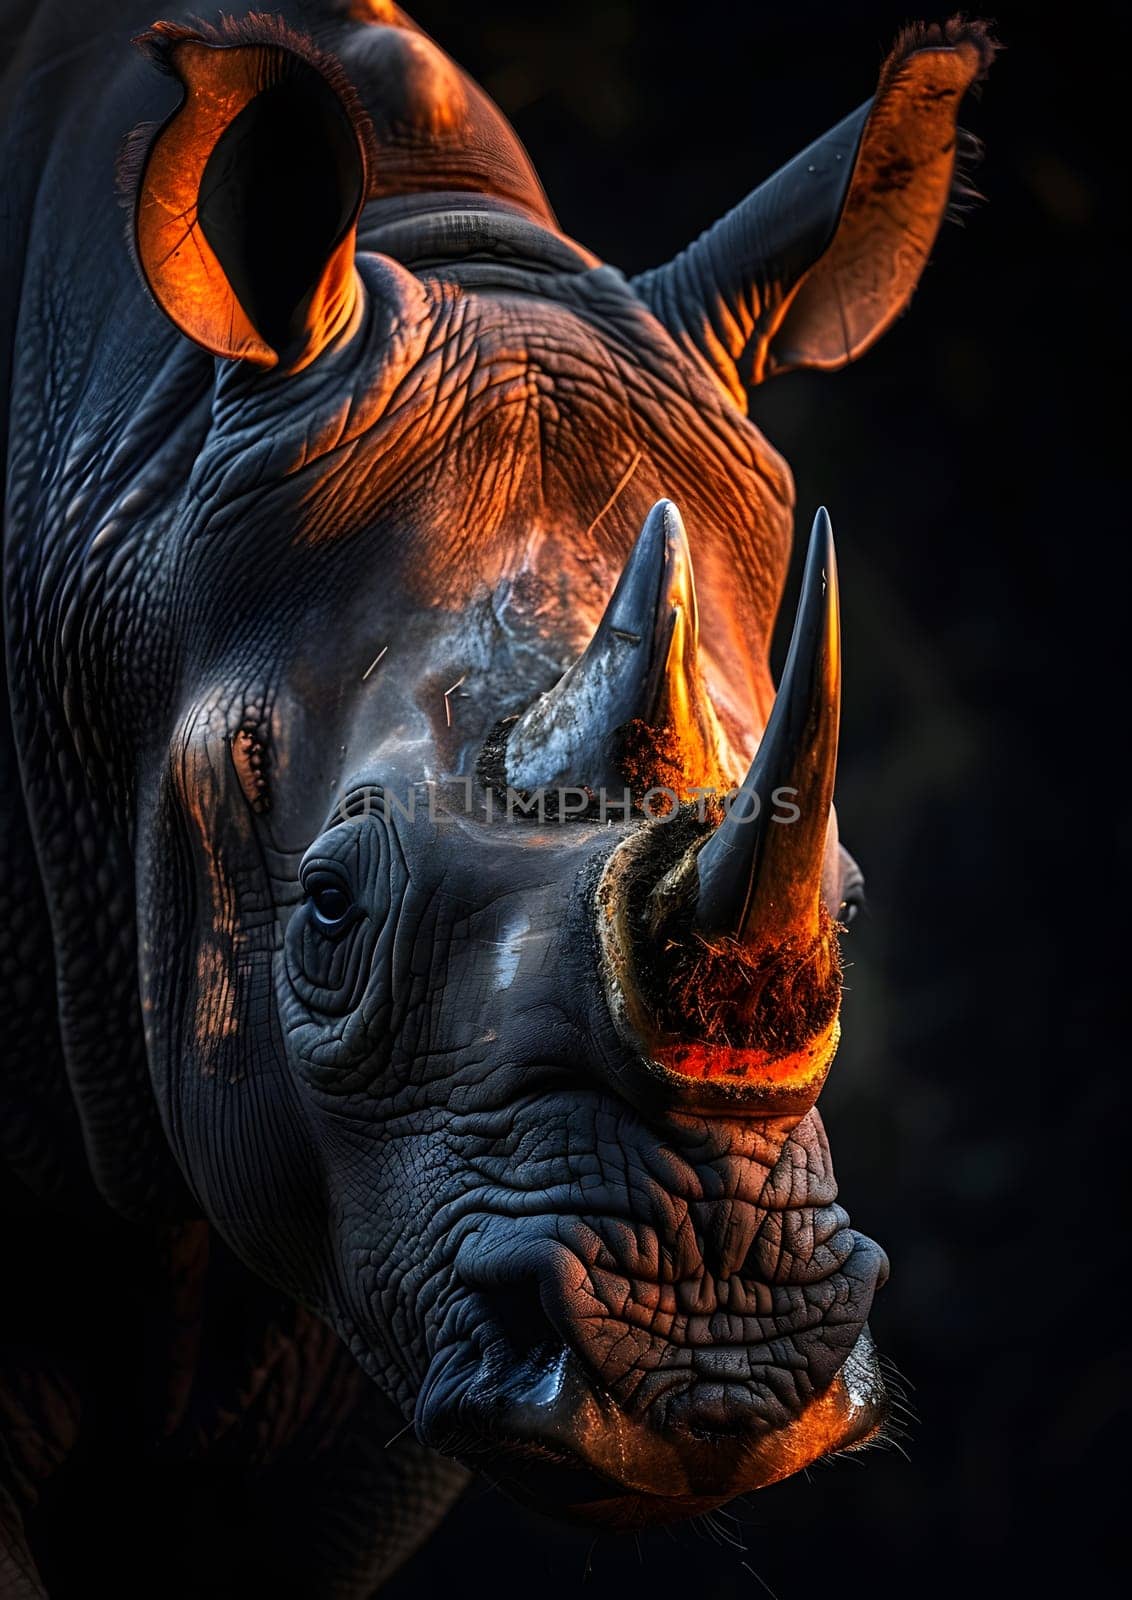 a close up of a rhino s face with a large horn by Nadtochiy